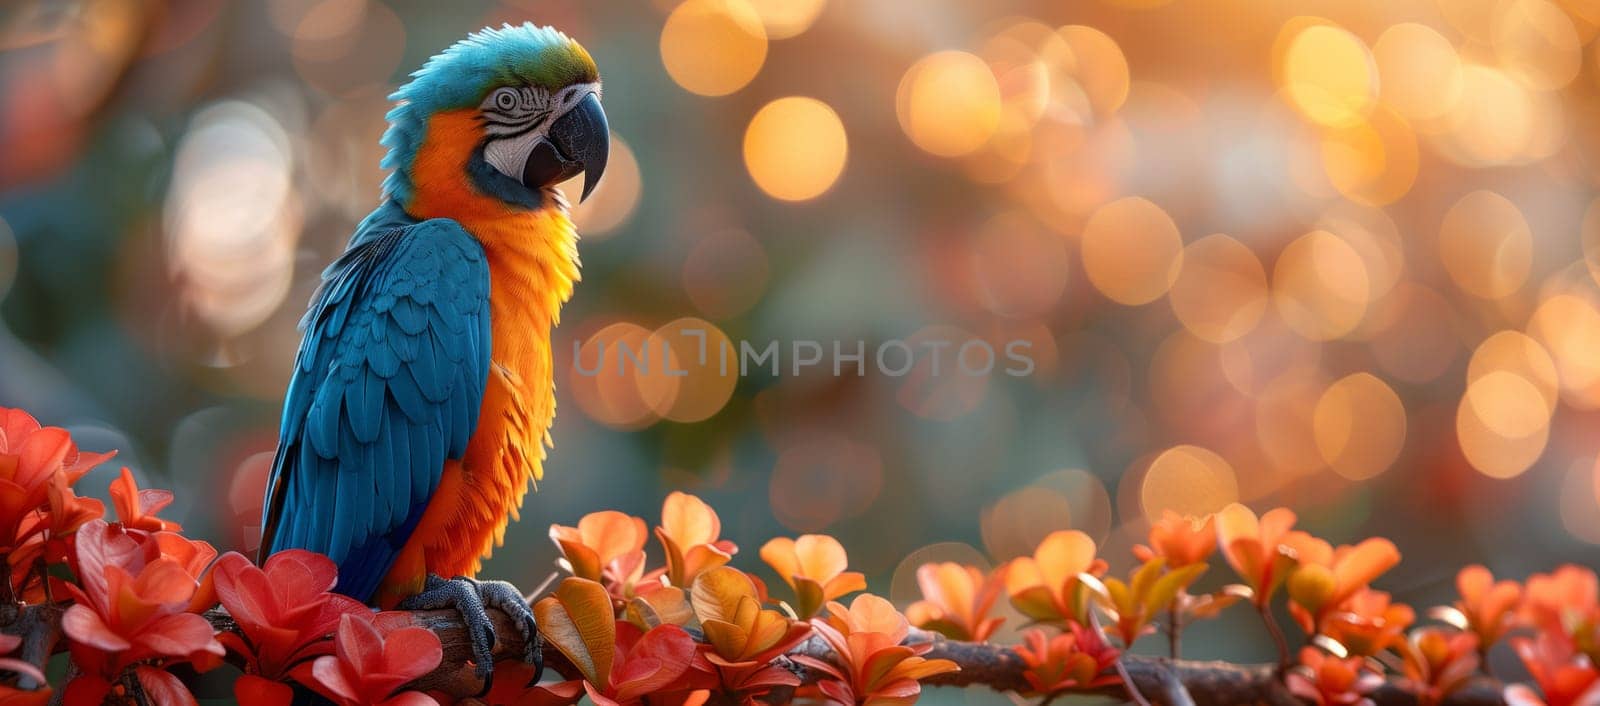 A colorful parrot with electric blue feathers is perched on a tree branch by richwolf